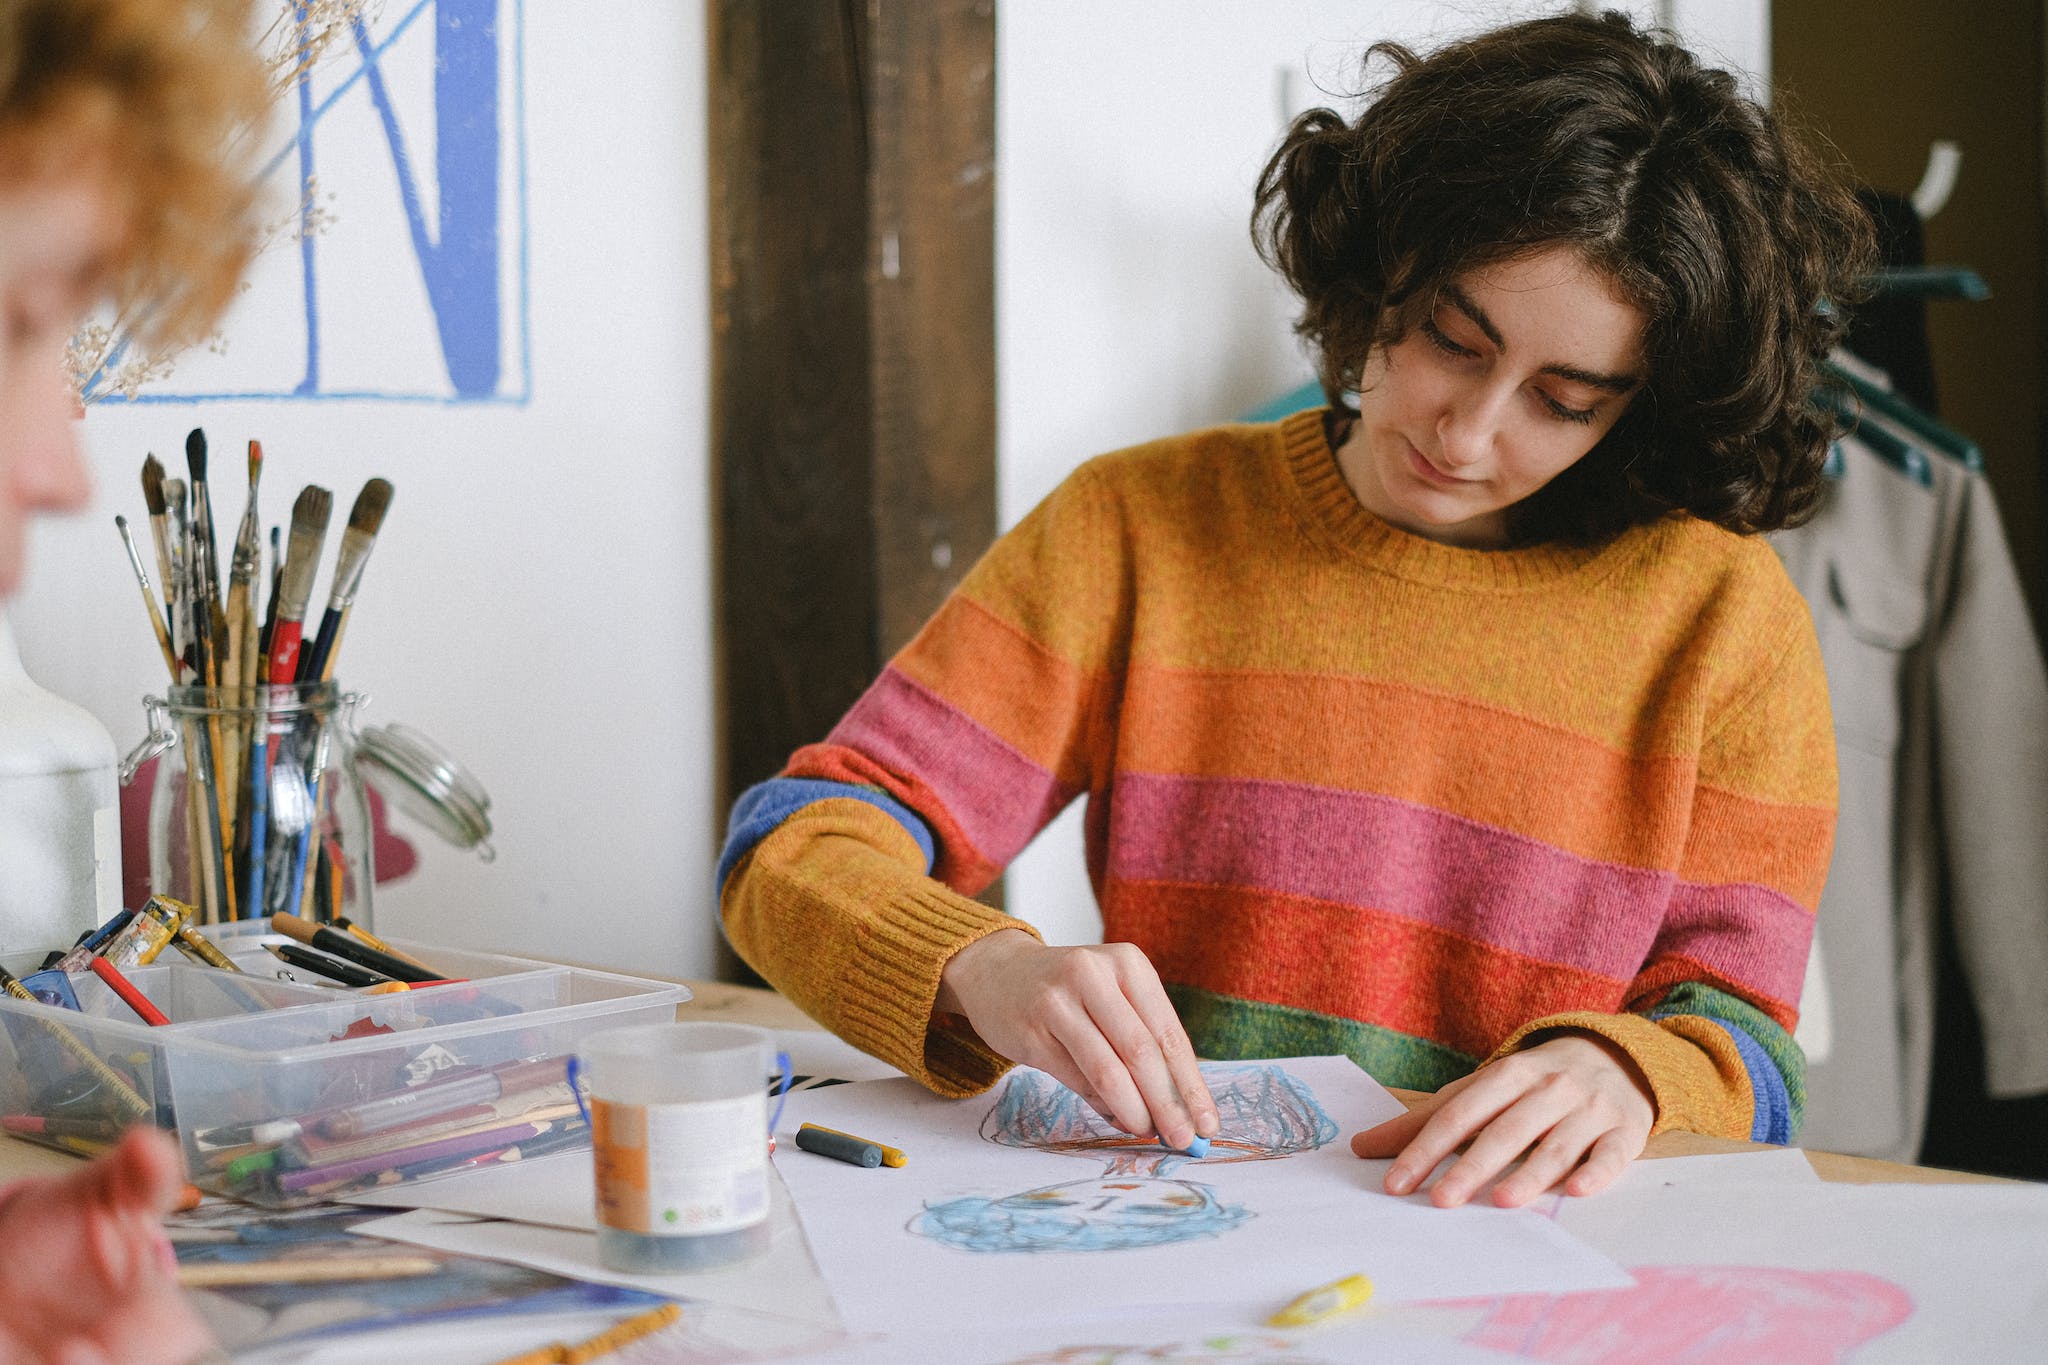 Focused woman drawing picture in studio